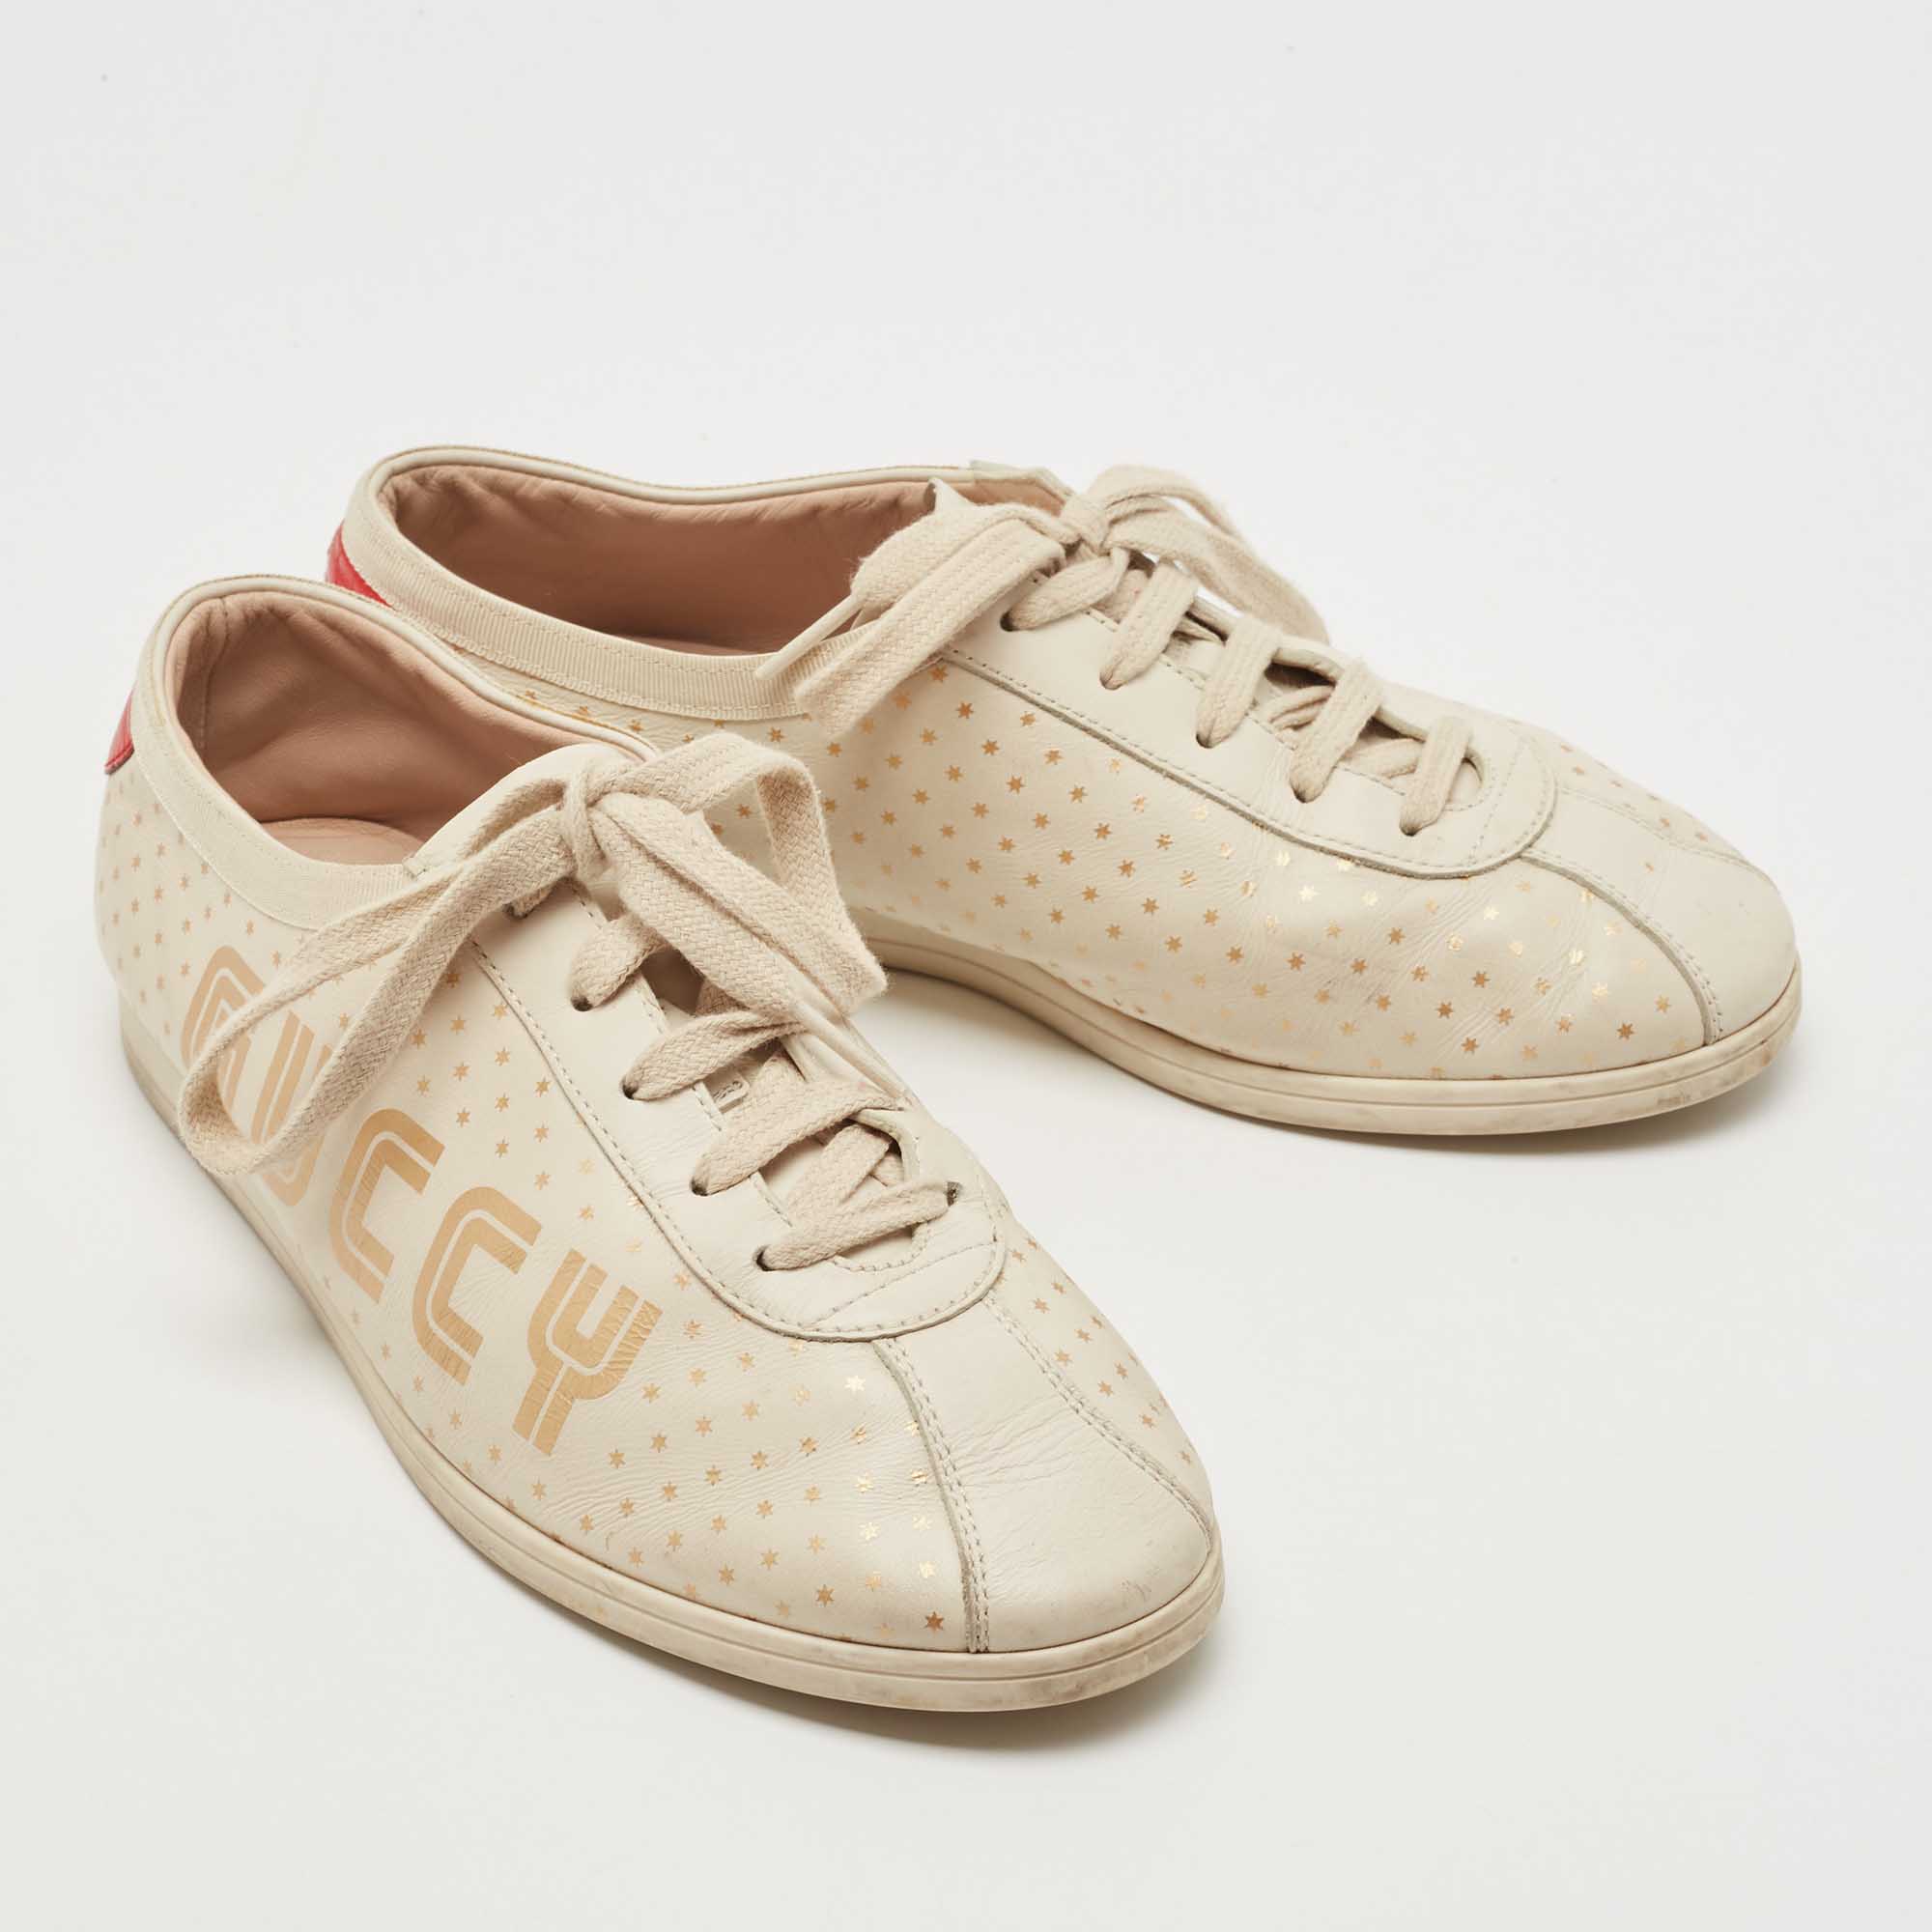 Gucci Beige Leather Falacer Guccy Sneakers Size 37